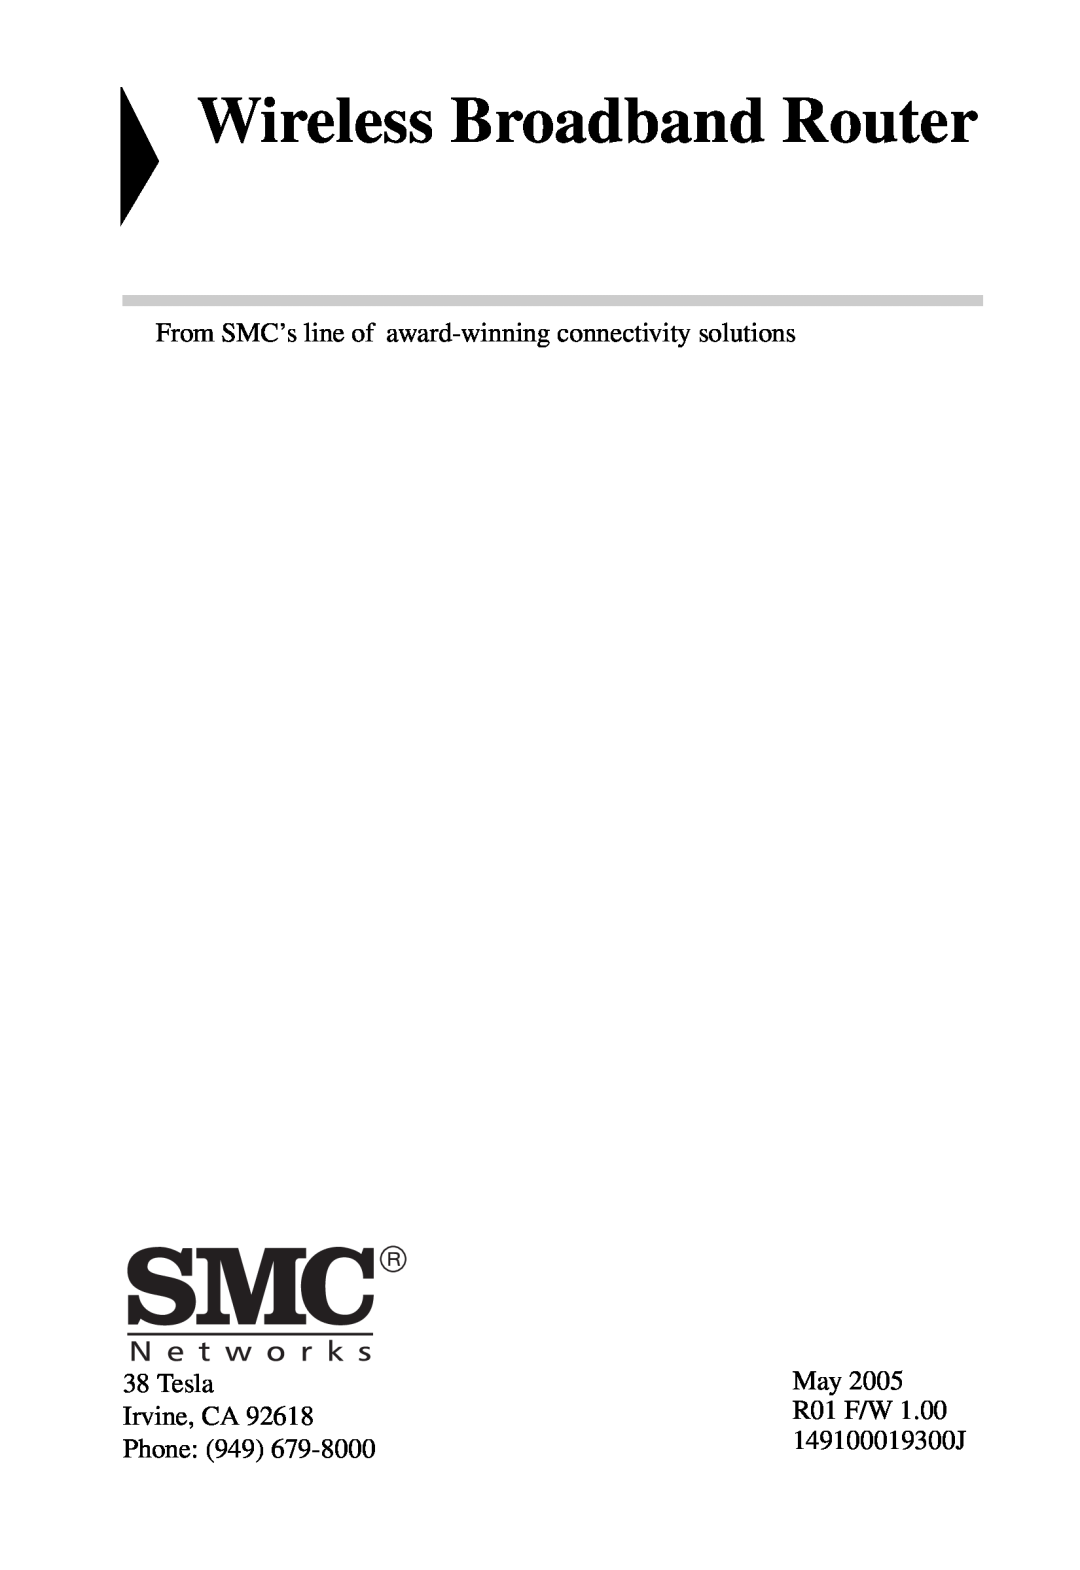 SMC Networks SMCWBR14T-G manual Wireless Broadband Router, From SMC’s line of award-winning connectivity solutions, Tesla 